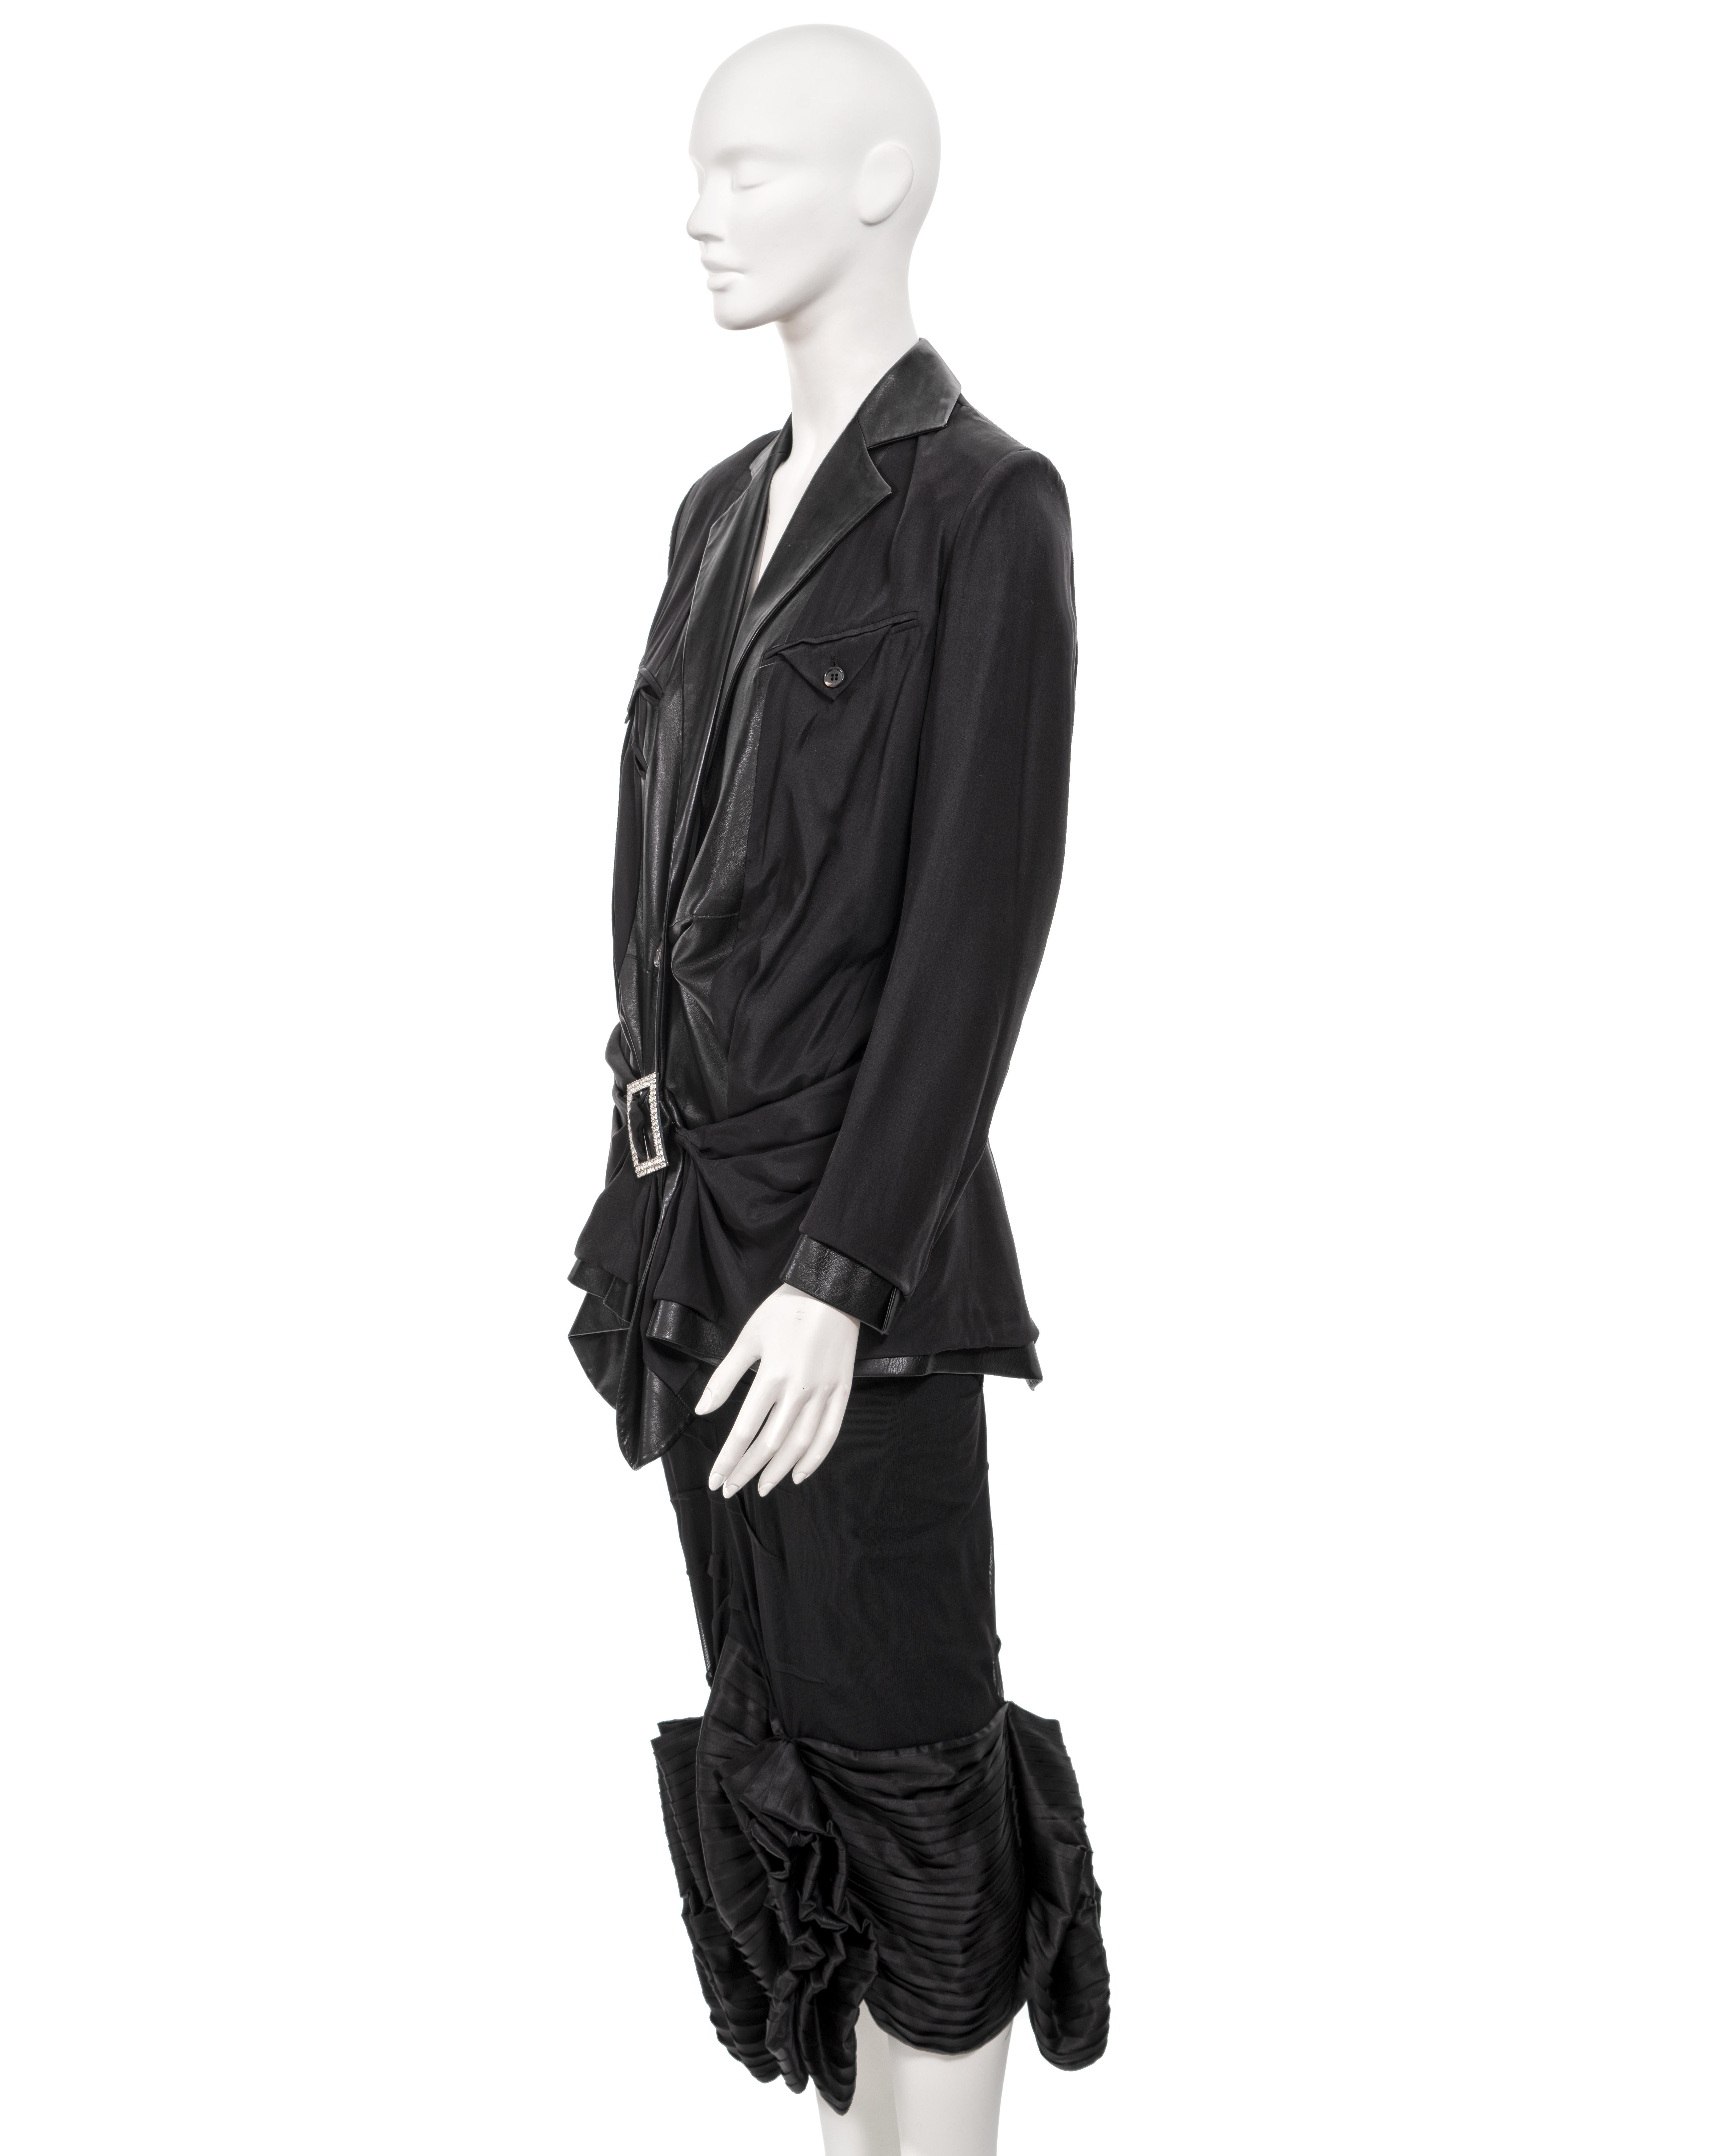 Christian Dior by John Galliano inside-out leather jacket and skirt set, ss 2003 For Sale 7